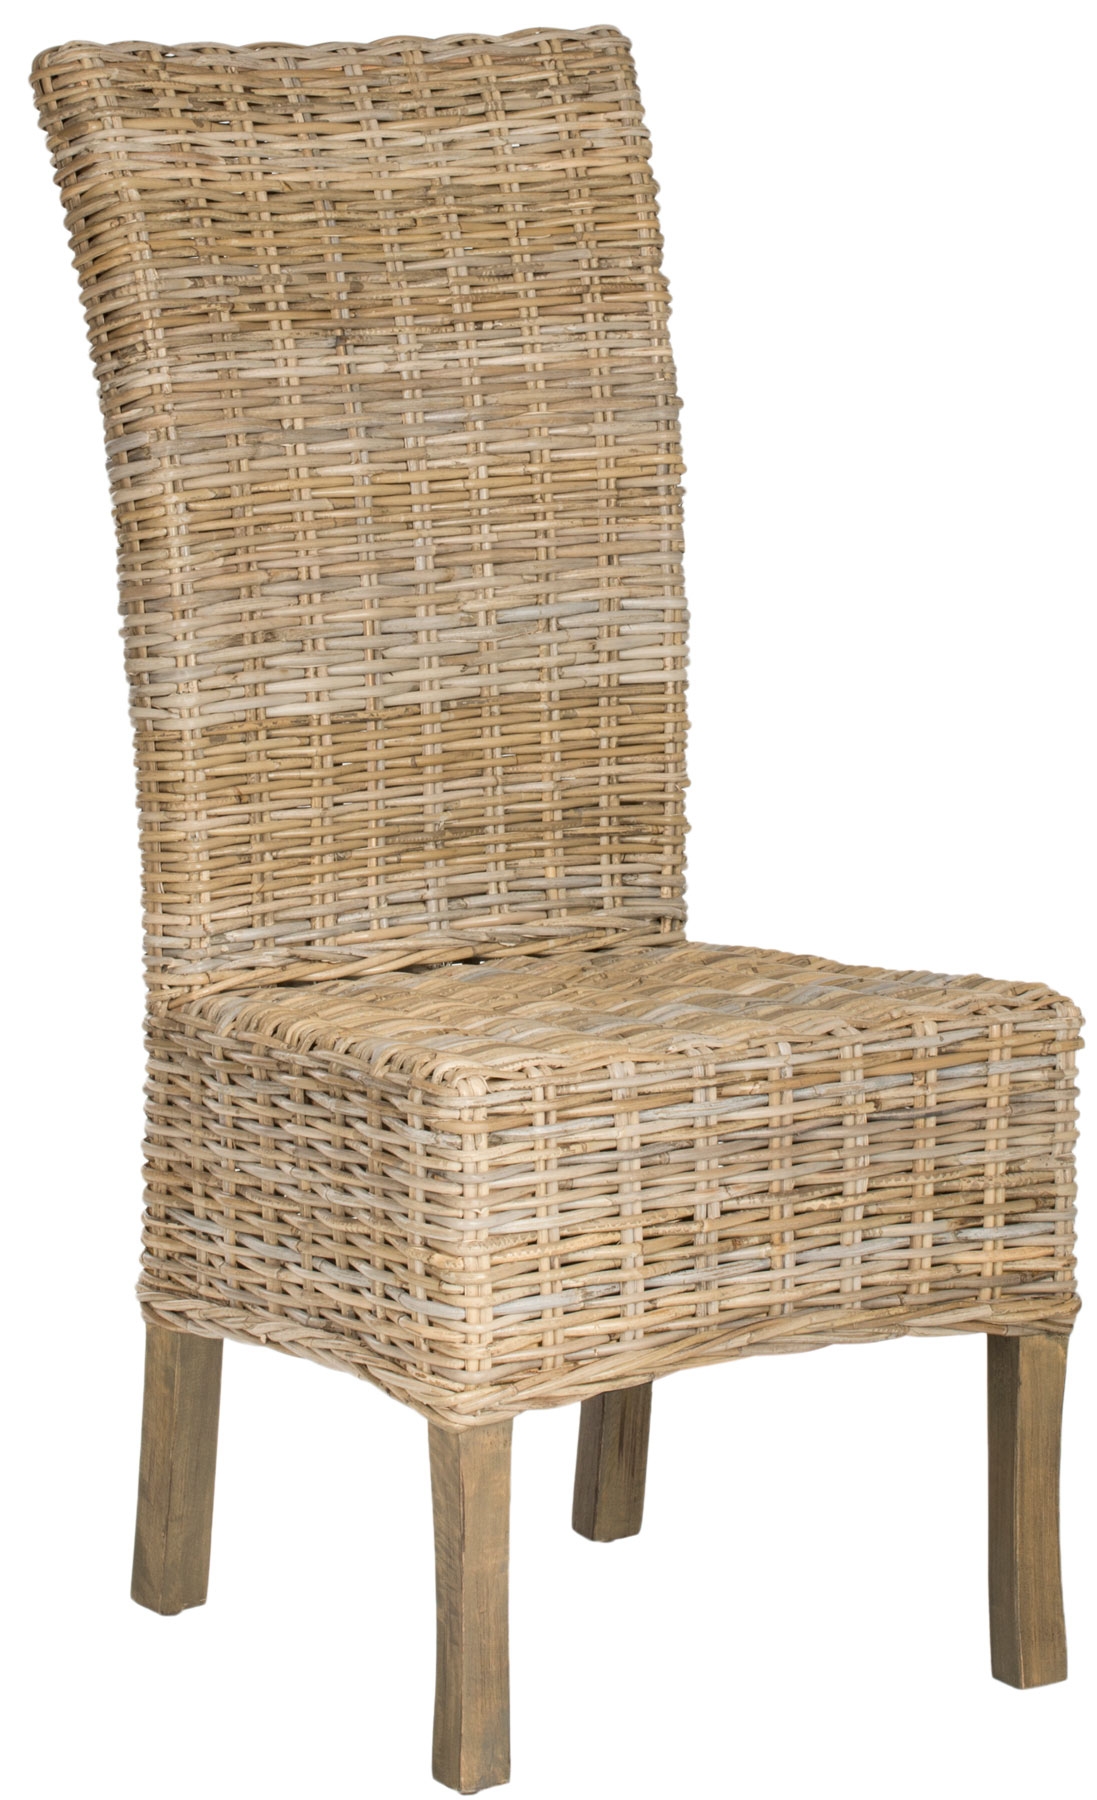 Quaker 19''H Rattan Side Chair - Natural Unfinished - Safavieh - Image 1